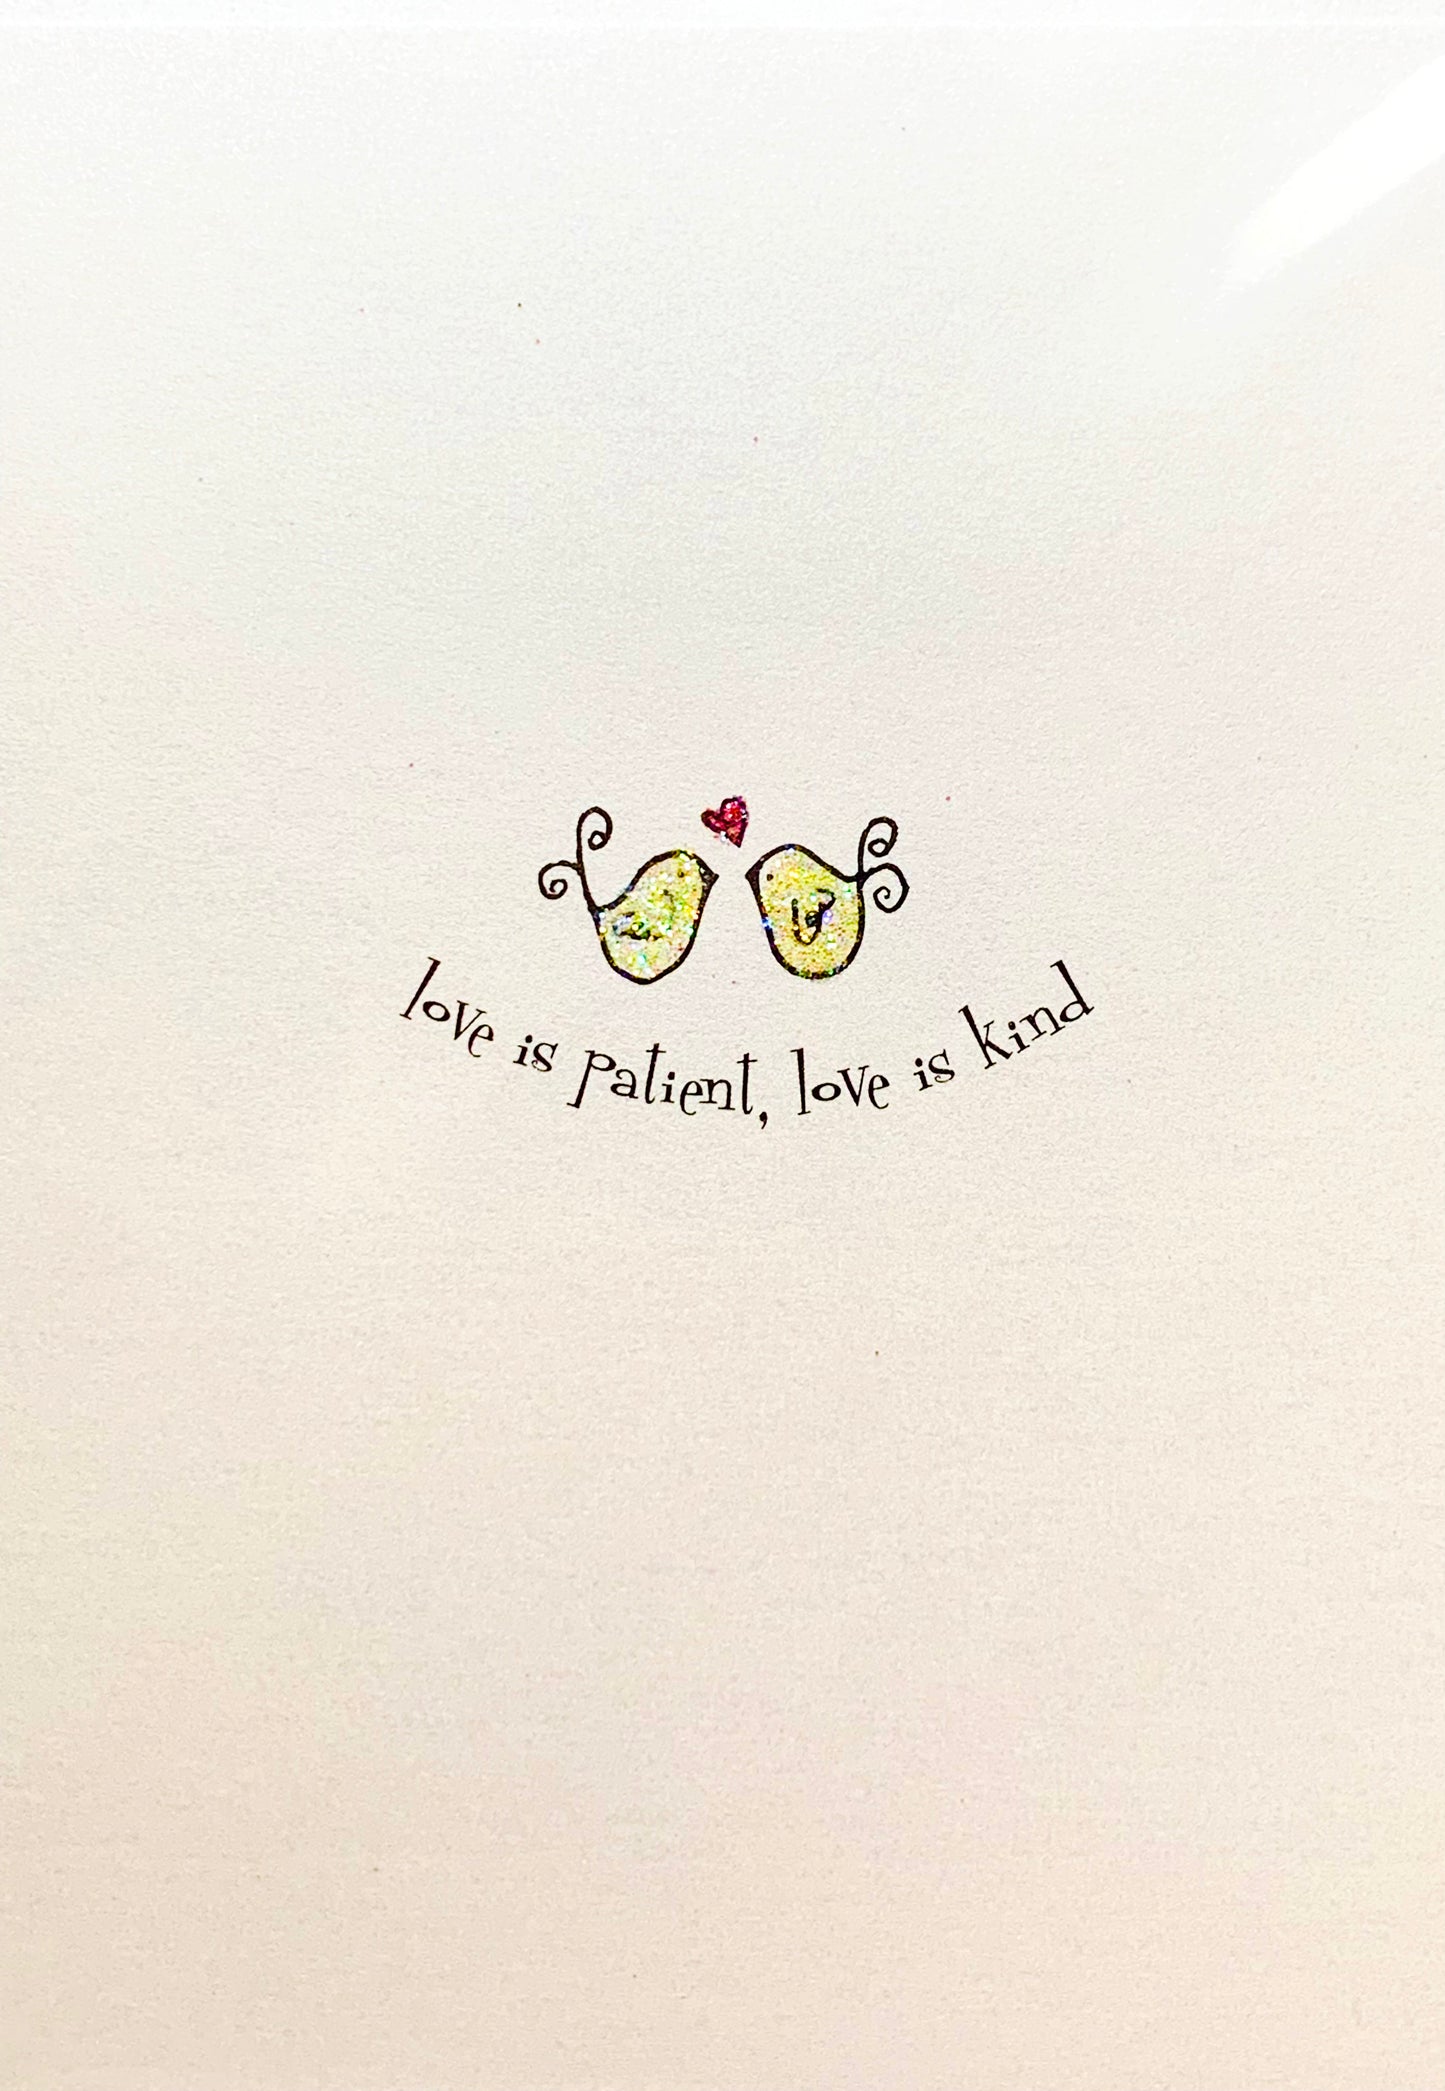 Love is patient, love is kind